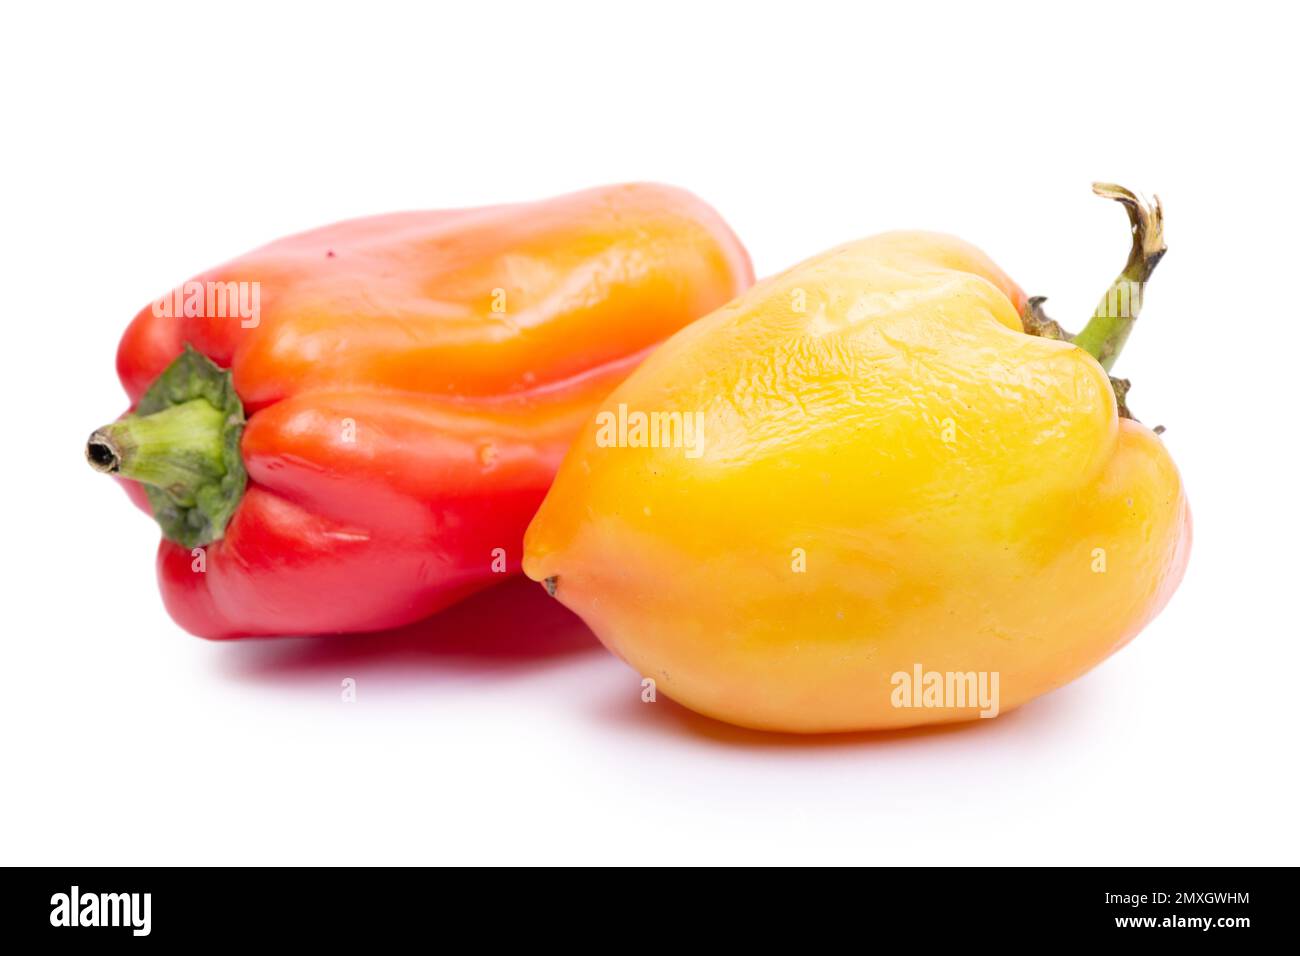 Two old bell peppers isolated on white background Stock Photo